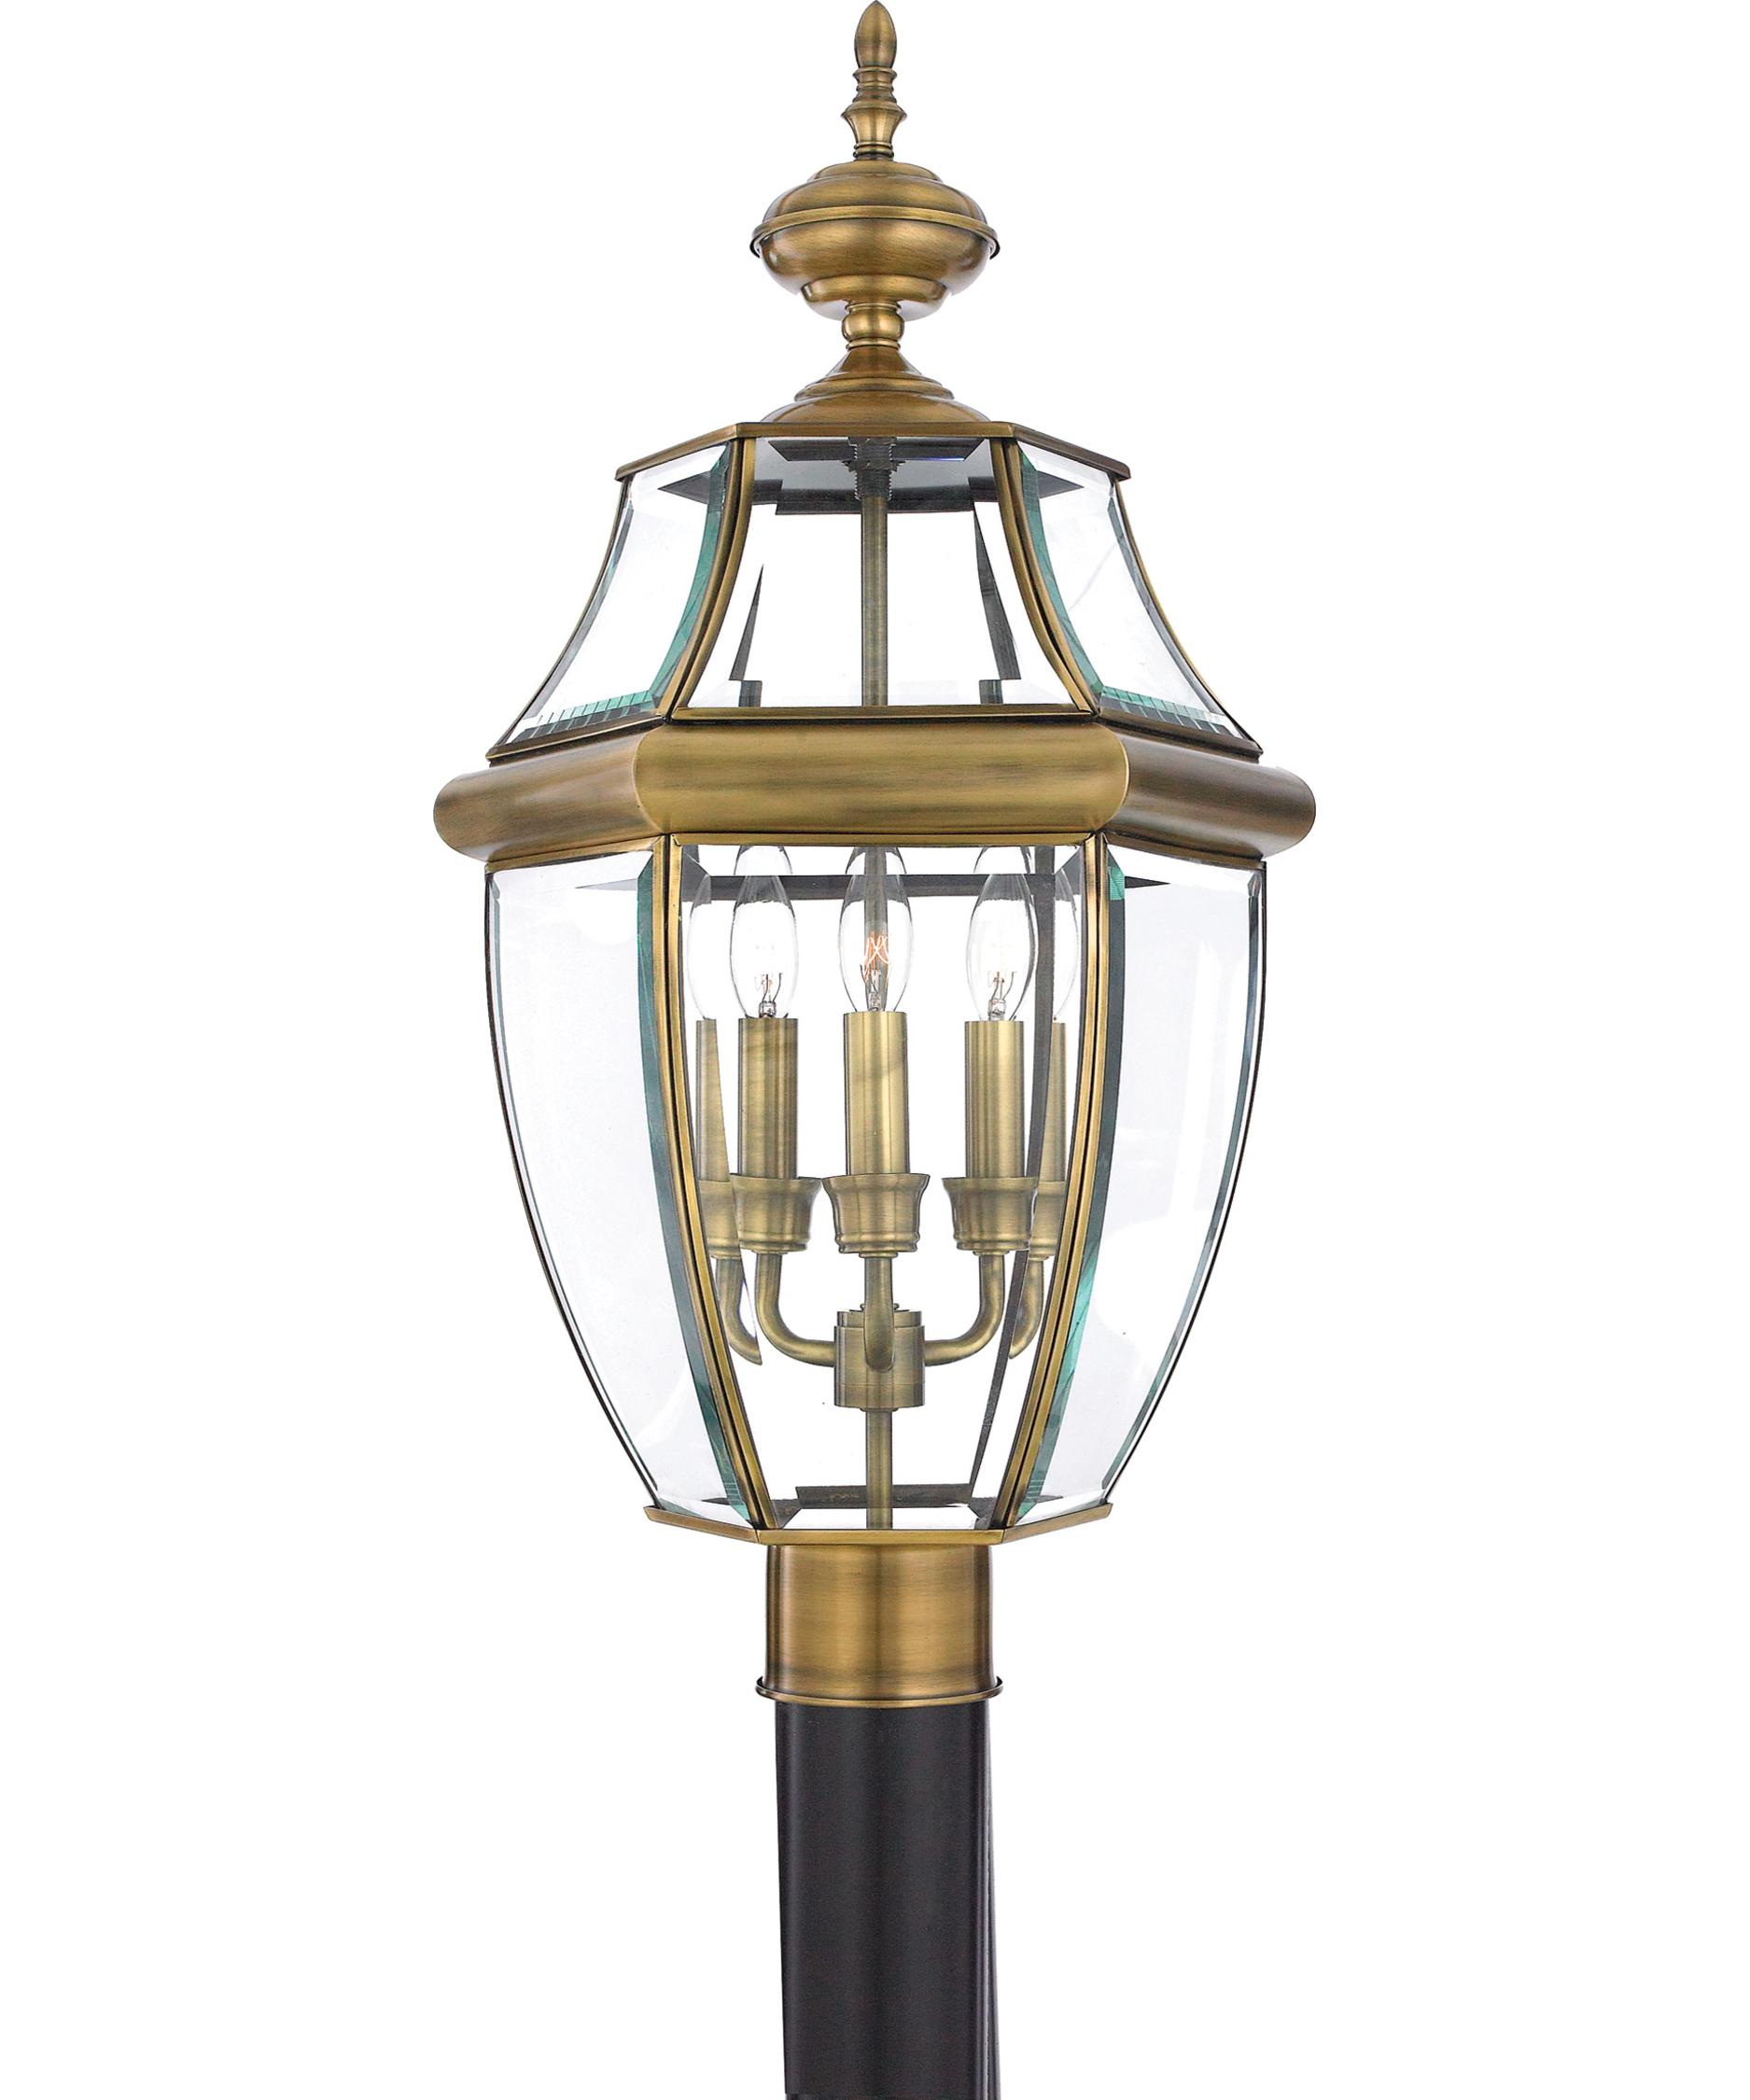 Quoizel NY9043 Newbury 12 Inch Wide 3 Light Outdoor Post Lamp ...